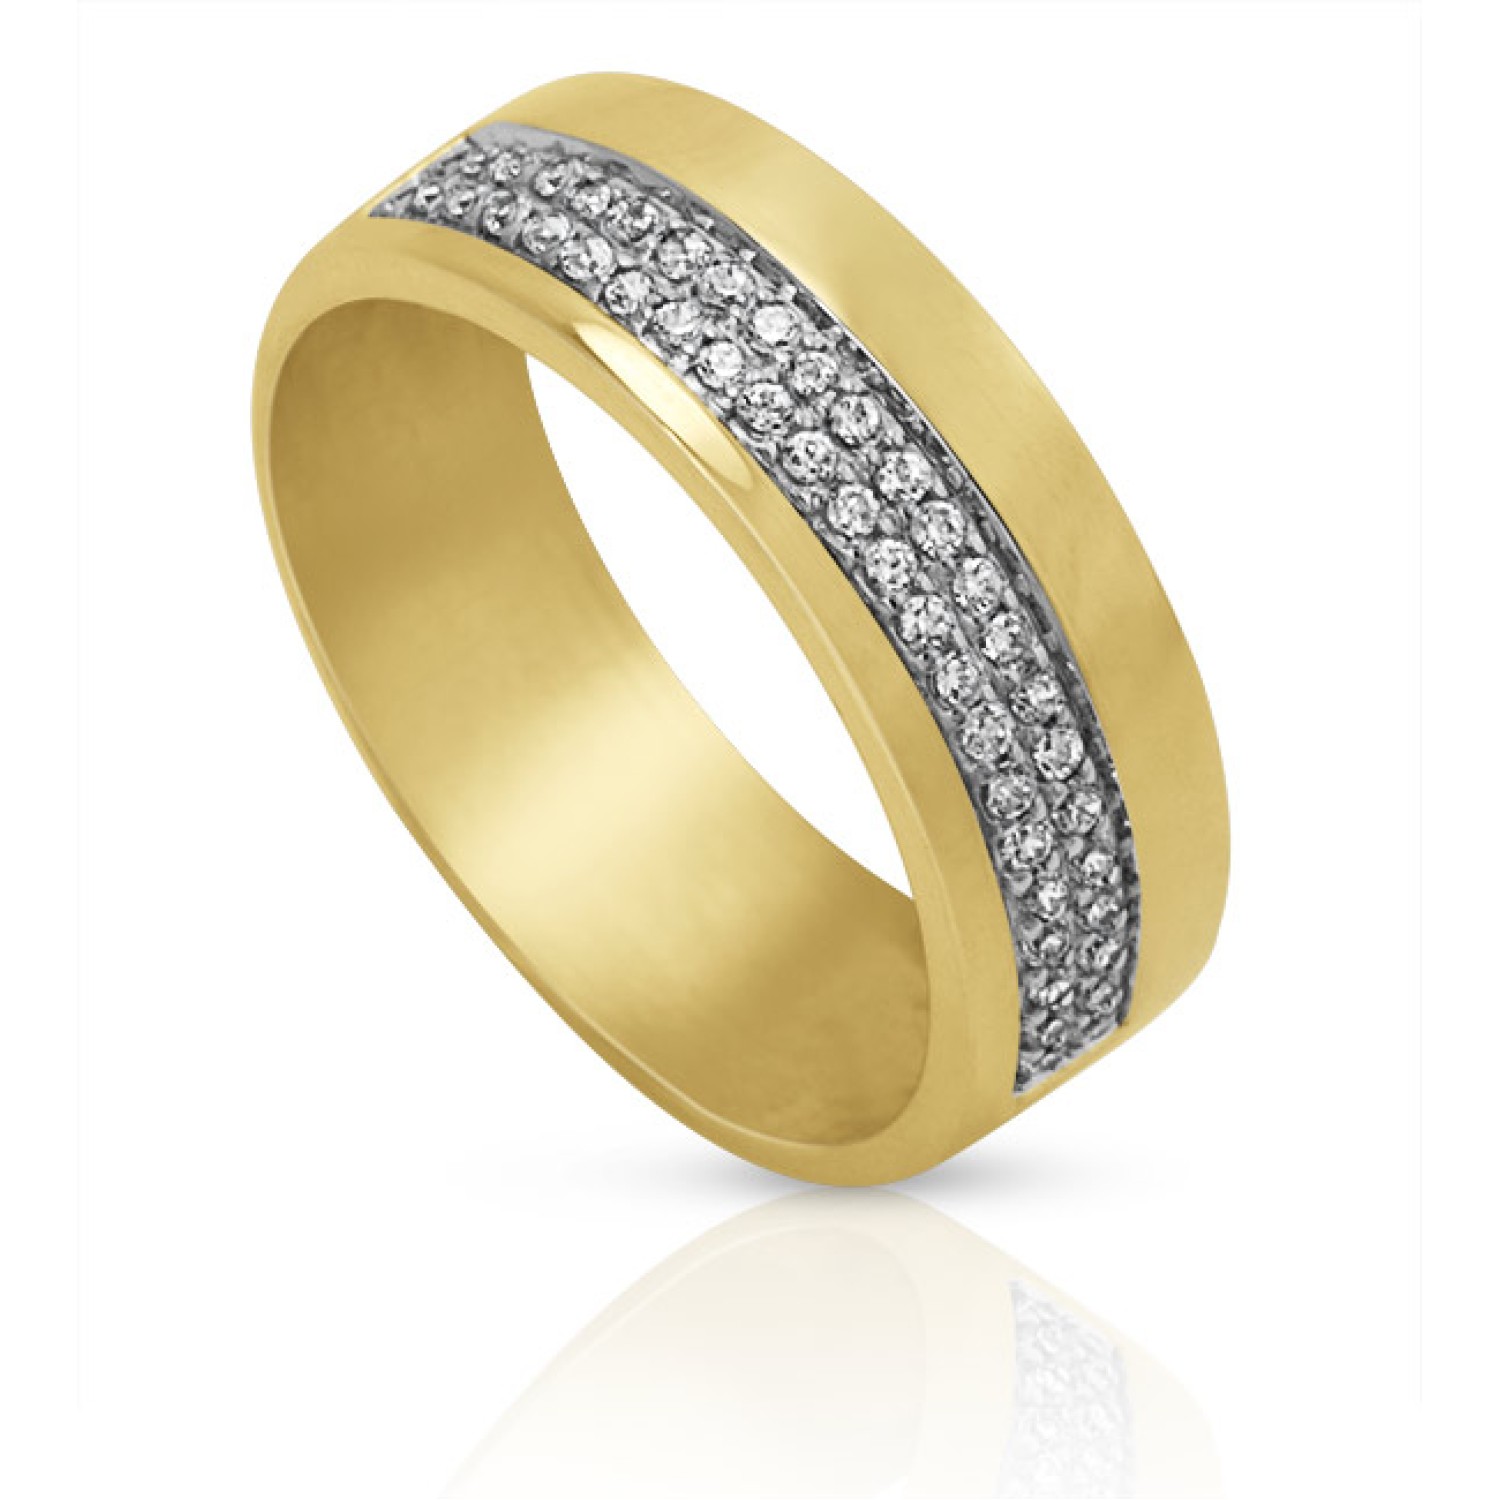 9ct Cubic Zirconia Band. A fashionable 9ct Ring set with Cubic Zirconia. 9ct Gold Set with Cubic Zirconia Stock Size N Available in store at Christies Hunters Plaza Papatoetoe or online Christies exclusive 5 year guarantee 3 Months No Paym @christies.onli